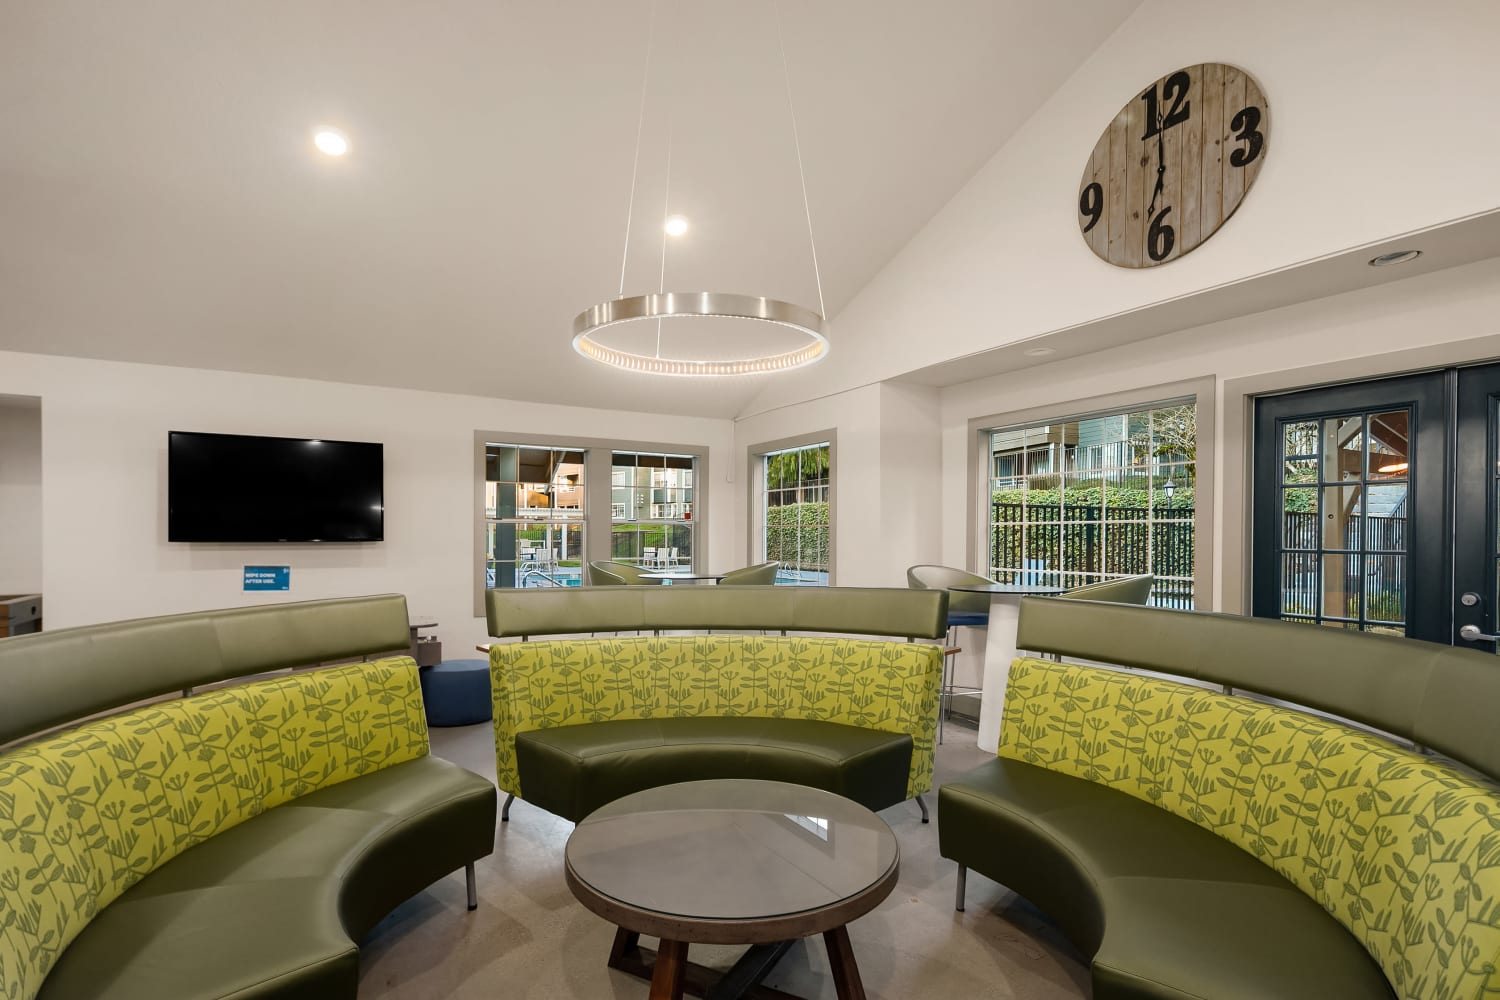 Lounge seating at Overlook at Lakemont in Bellevue, Washington